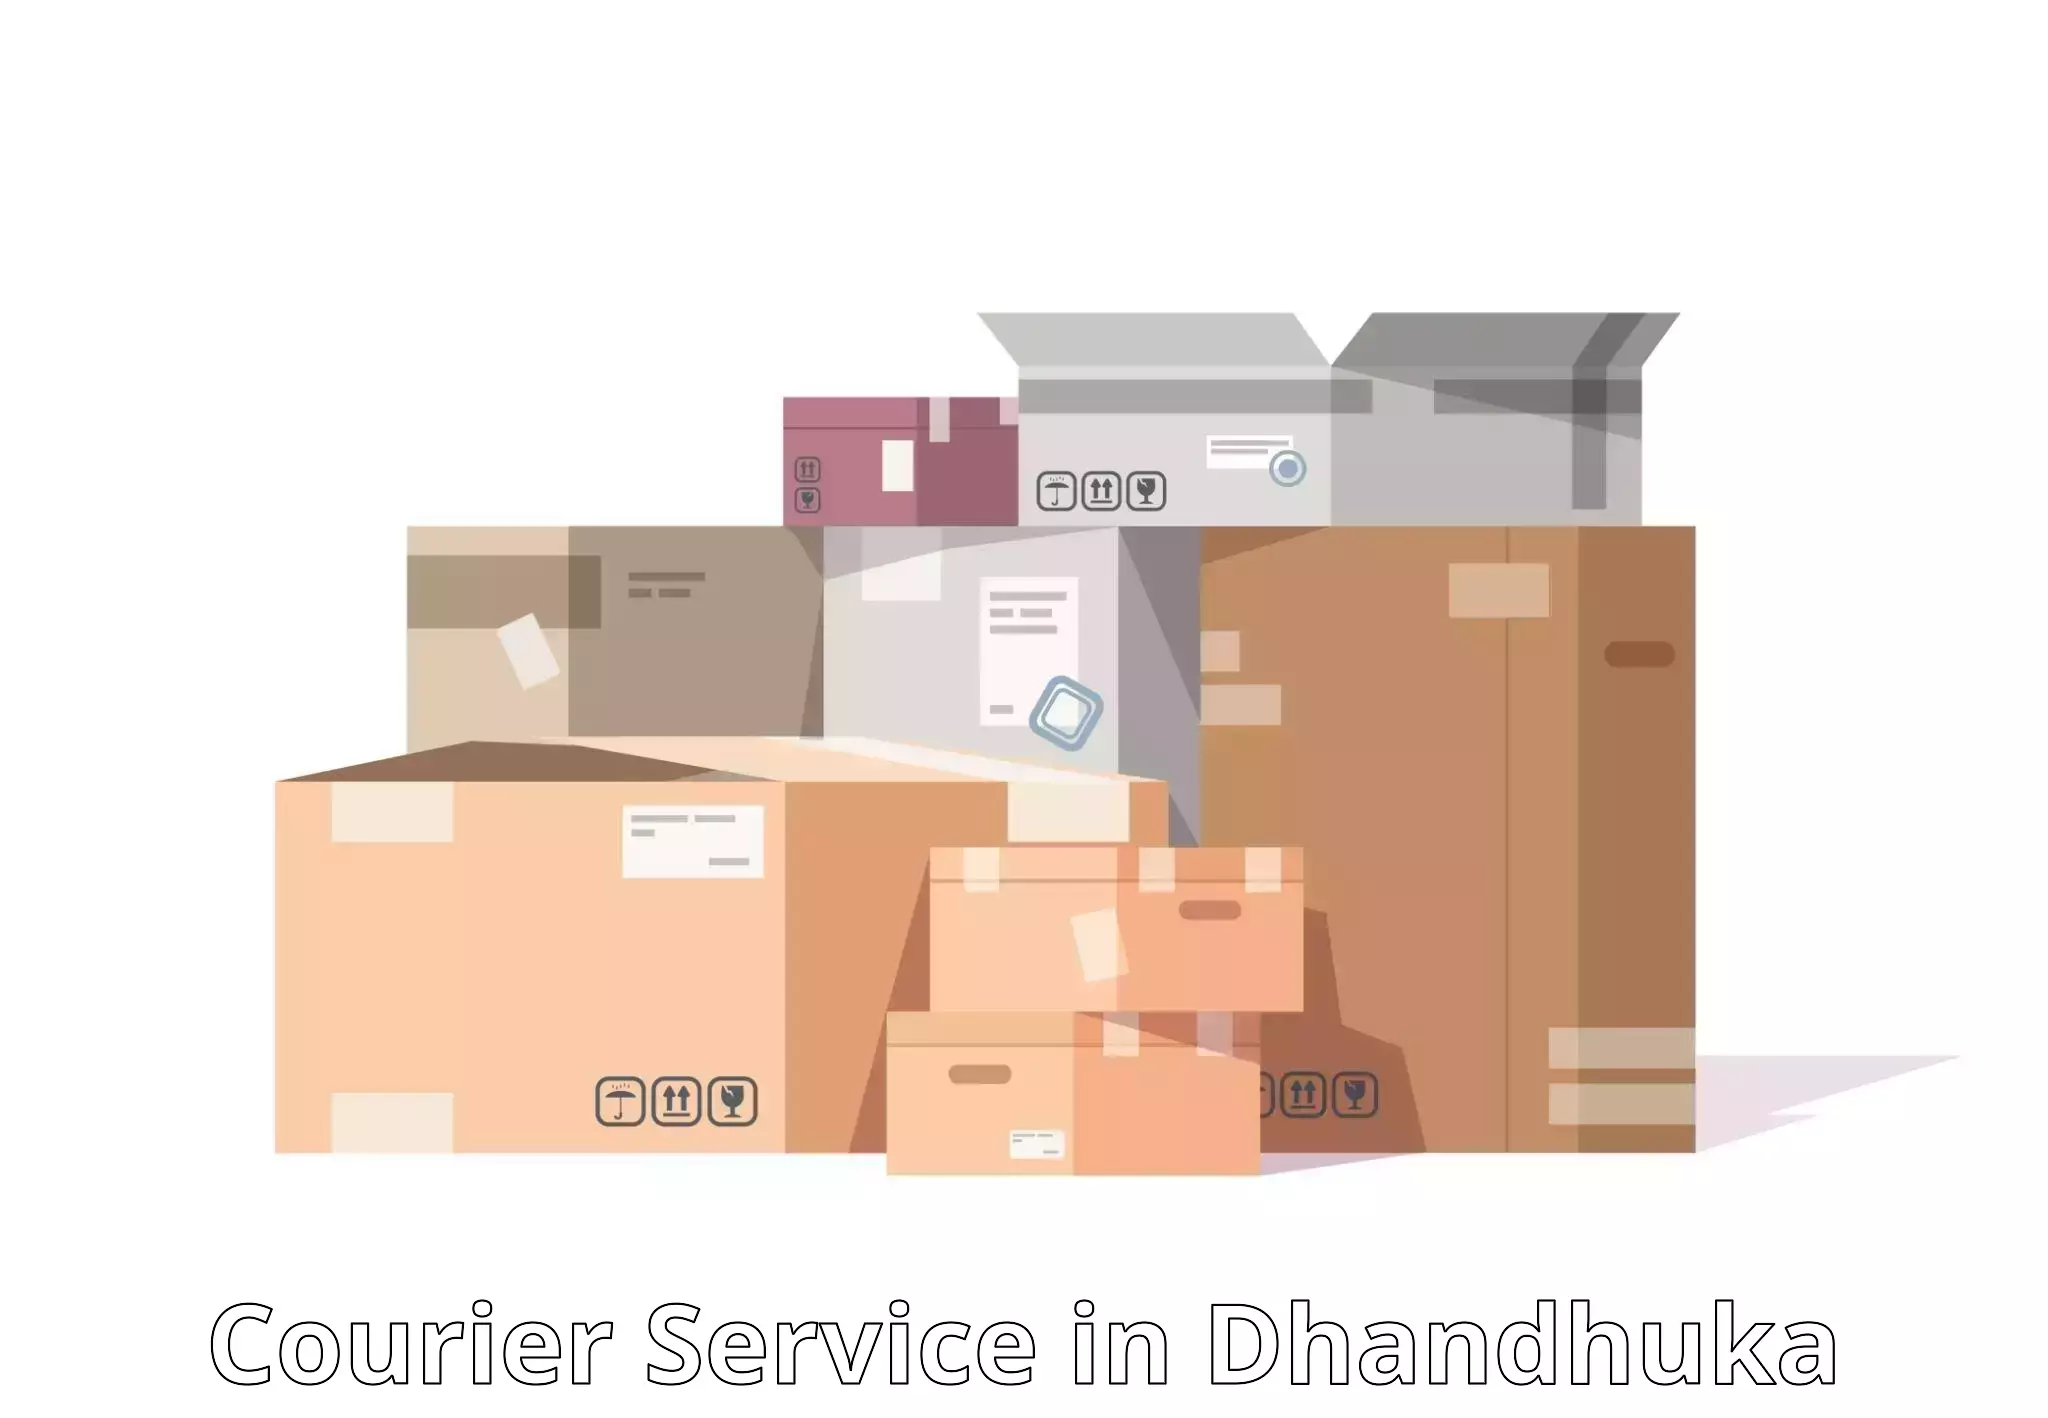 Diverse delivery methods in Dhandhuka